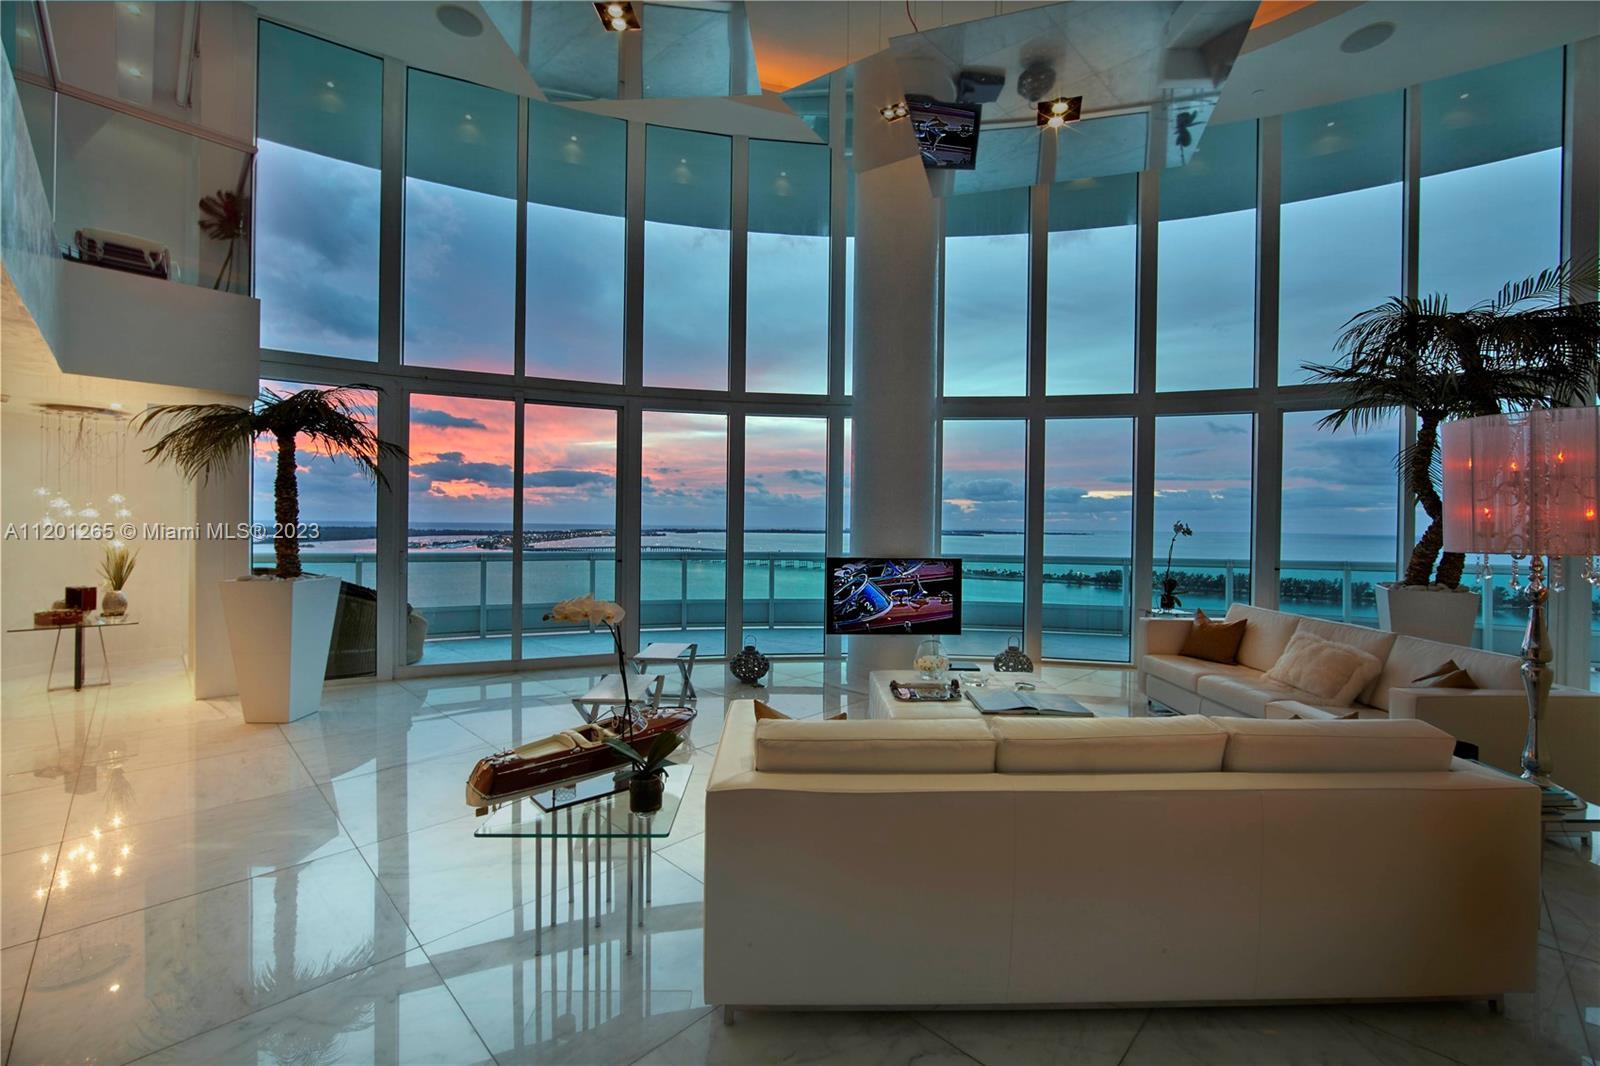 The iconic Santa Maria on Brickell. Residence 2902 offers mesmerizing views of the bay and the skyli